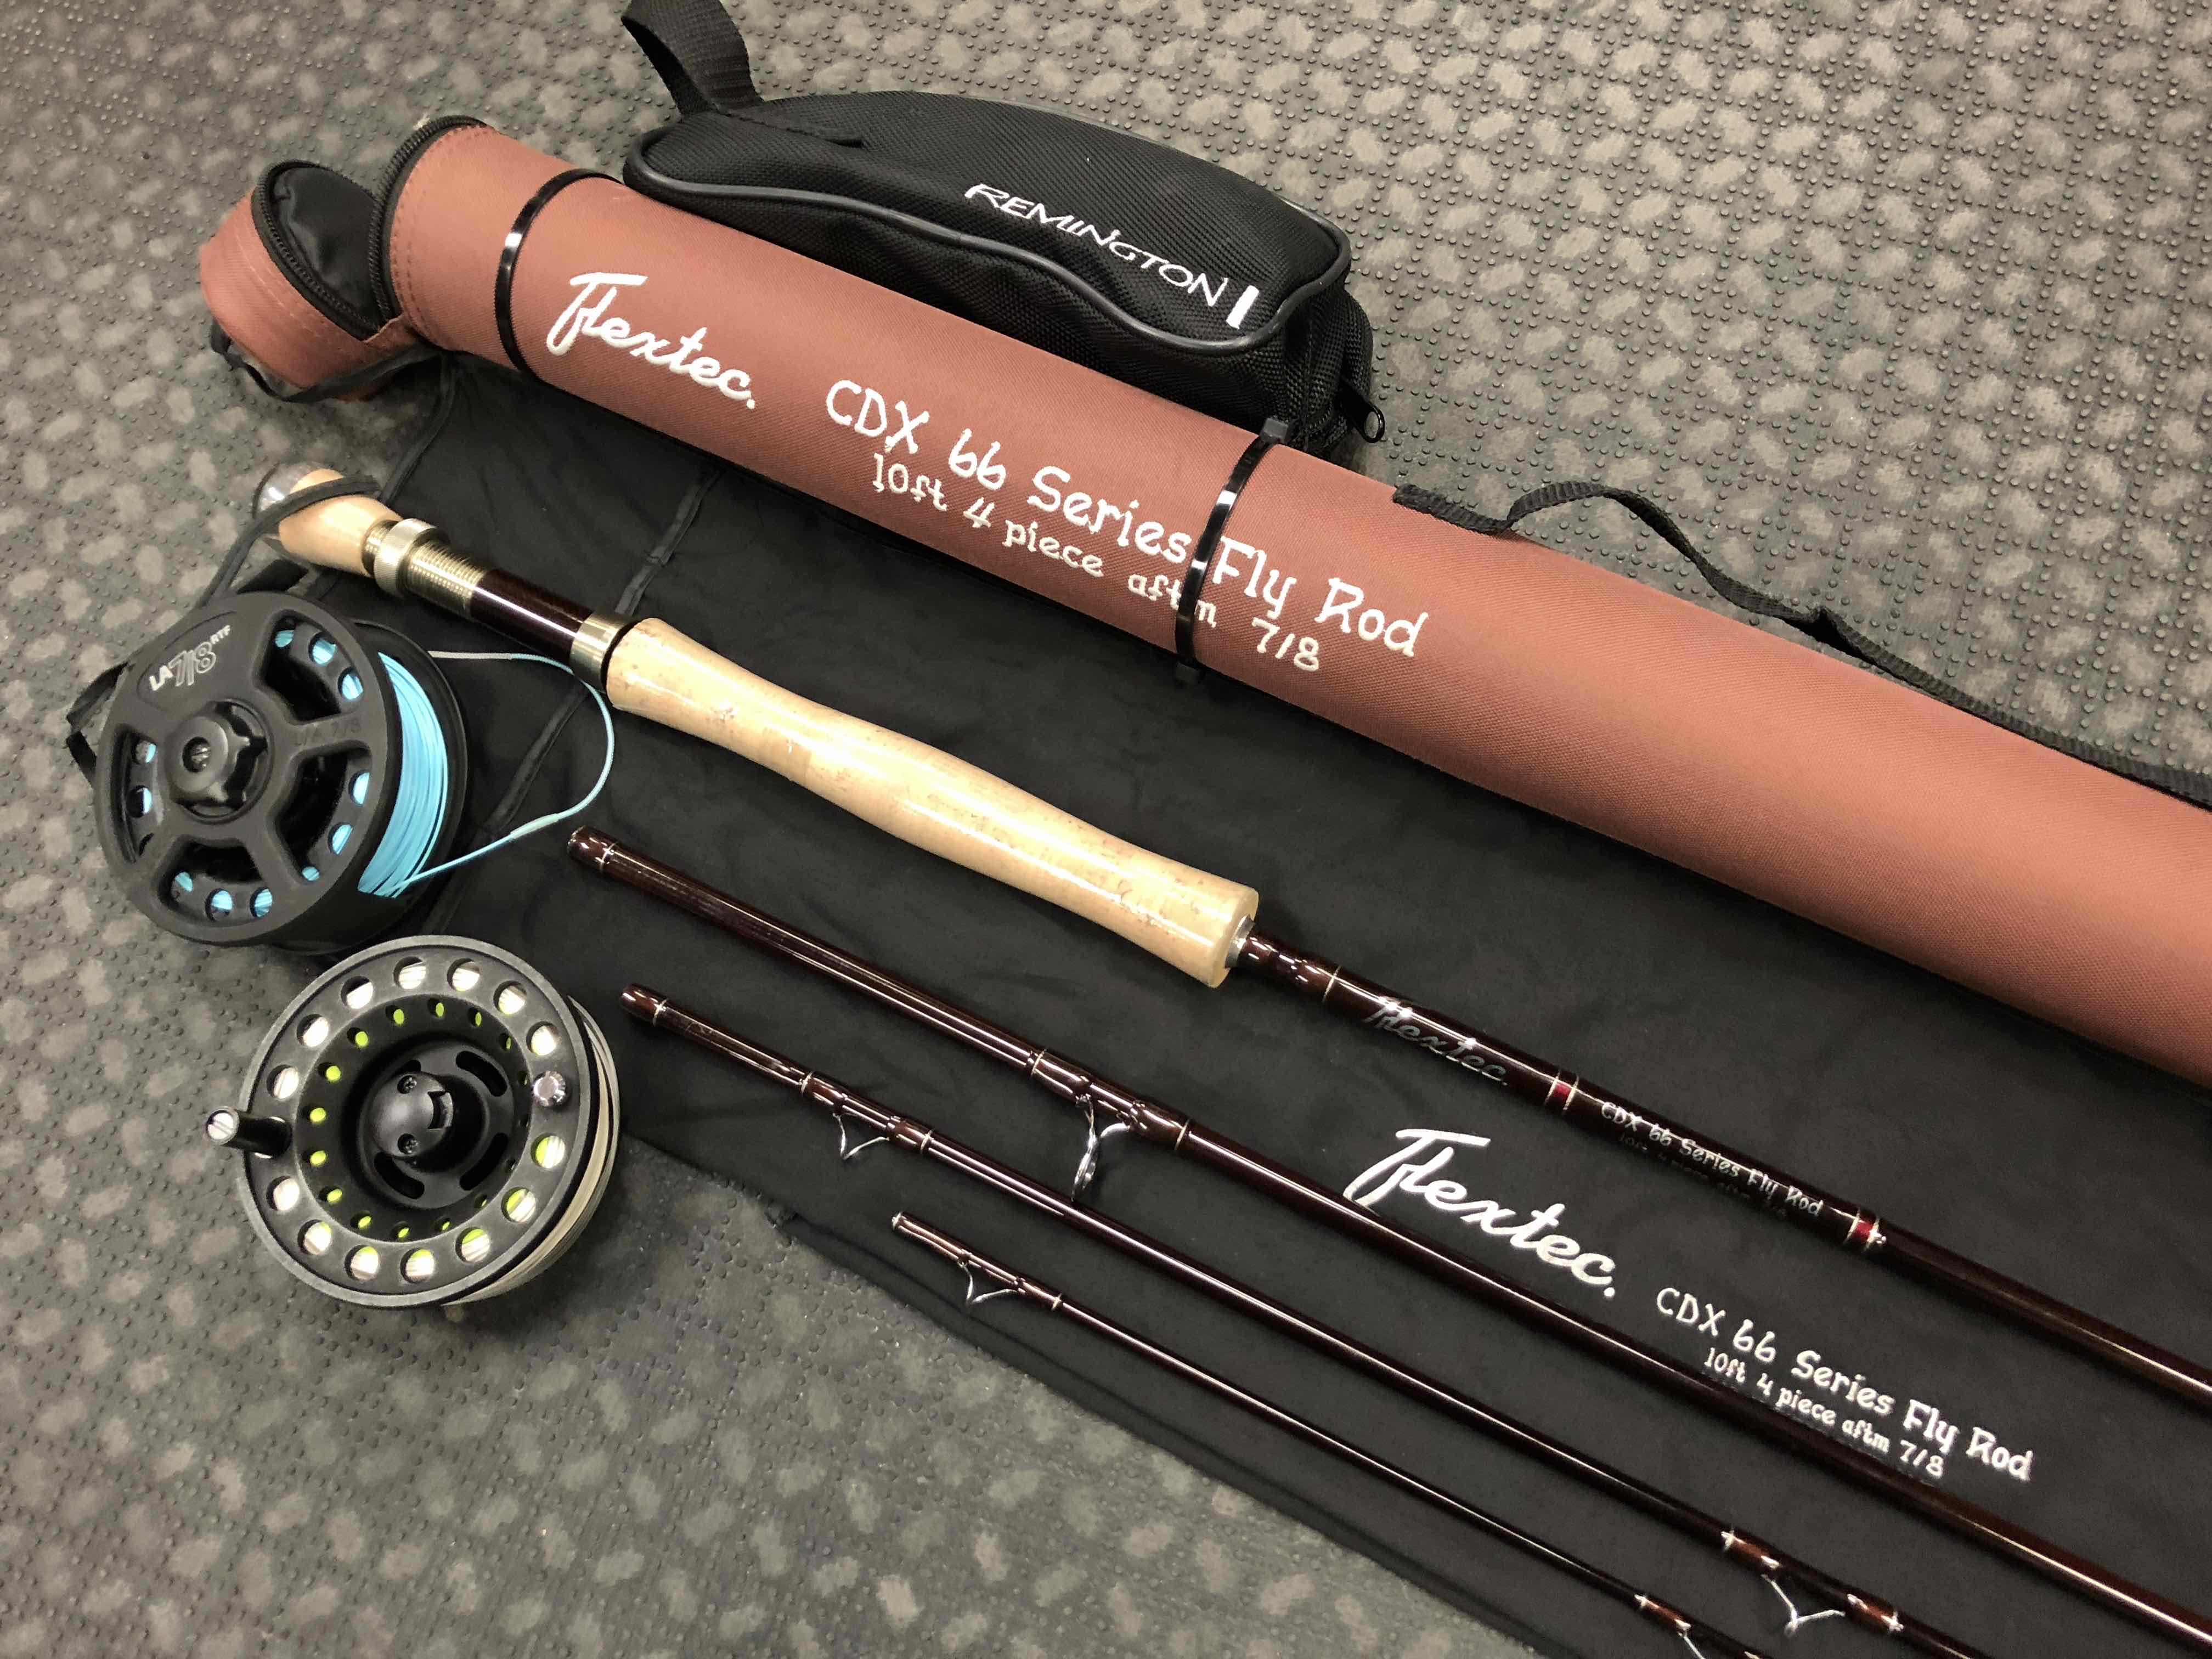 Flextec CDX 66 Series Fly Rod - 4pc 10’ 7/8Wt c/w Flextec Large Arbour Fly Reel, Spare Spool & Fly Line - LIKE NEW! - $100